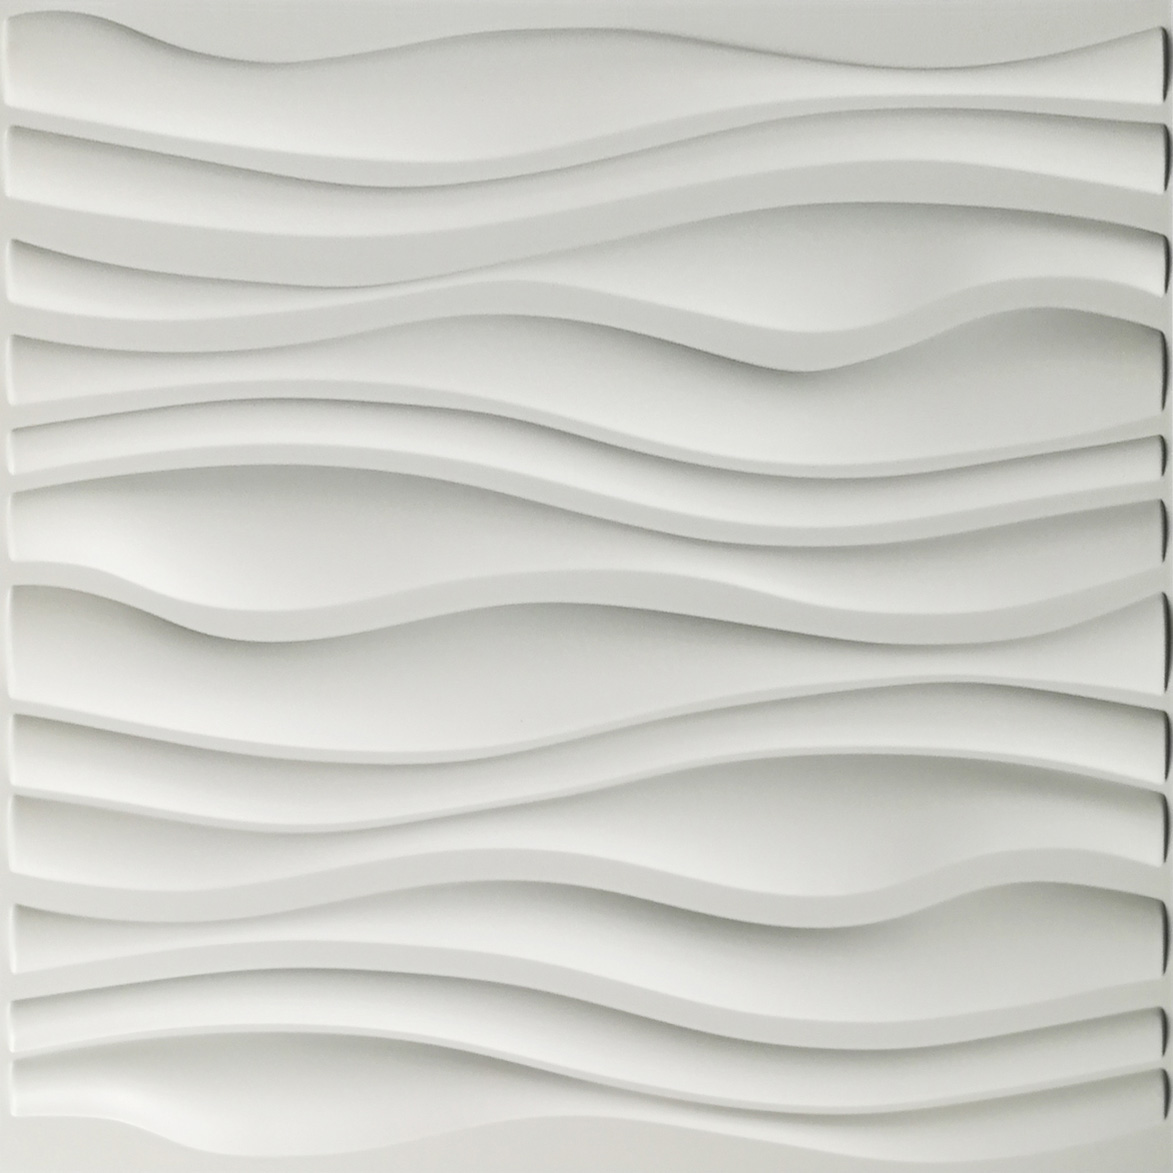 A10037 - PVC Wave Board Textured 3D Wall Panels, White Wave, 12 Tiles 32 SF